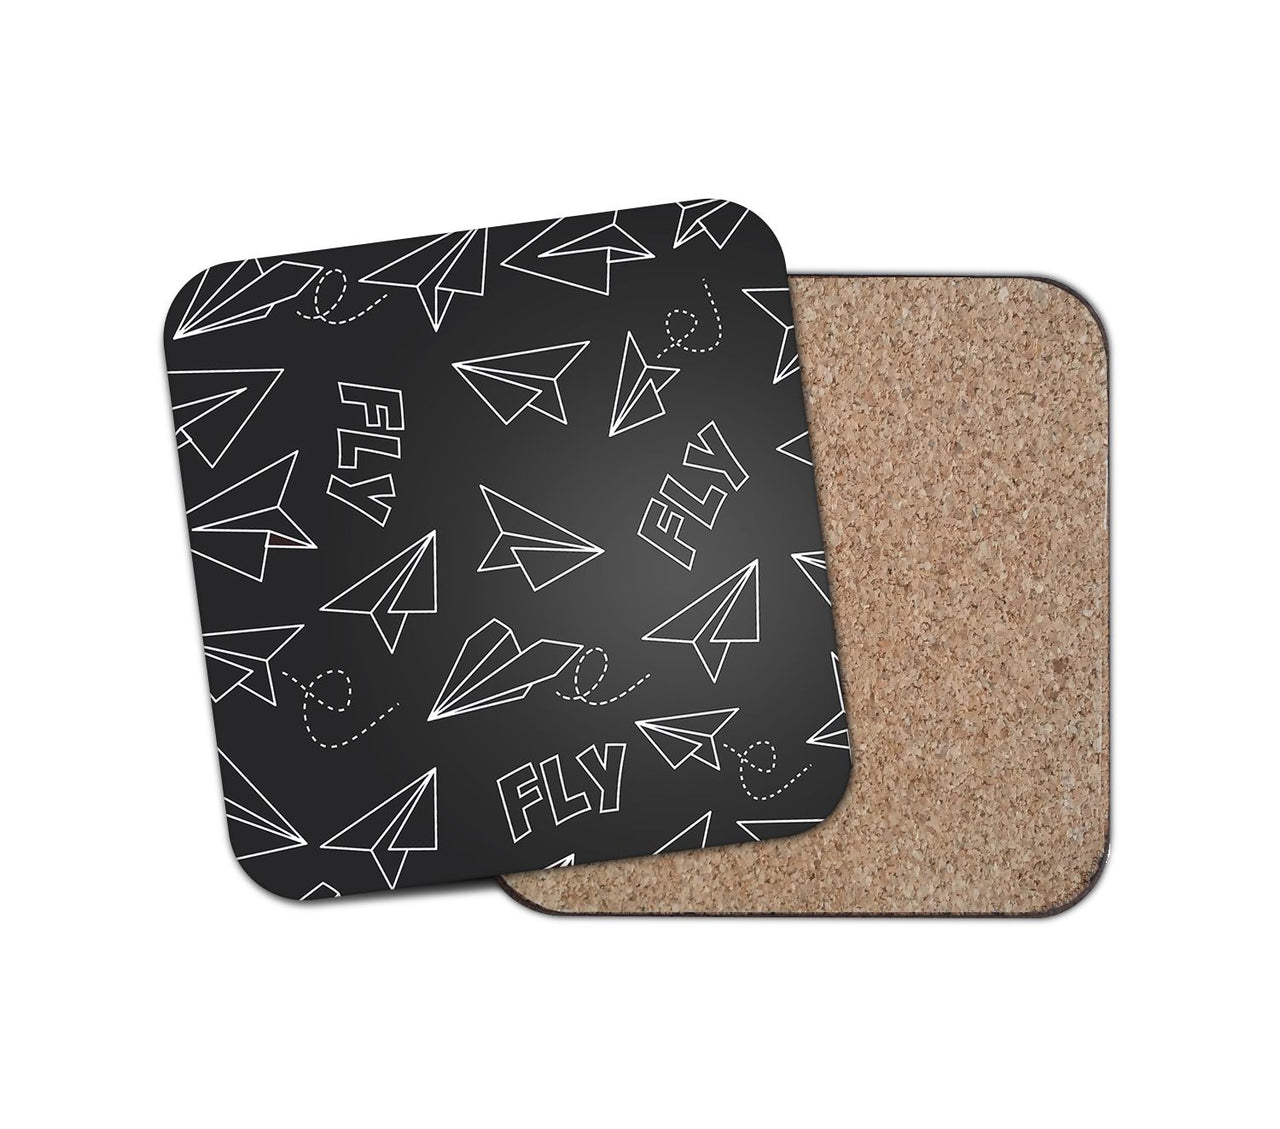 Paper Airplane & Fly (Gray) Designed Coasters